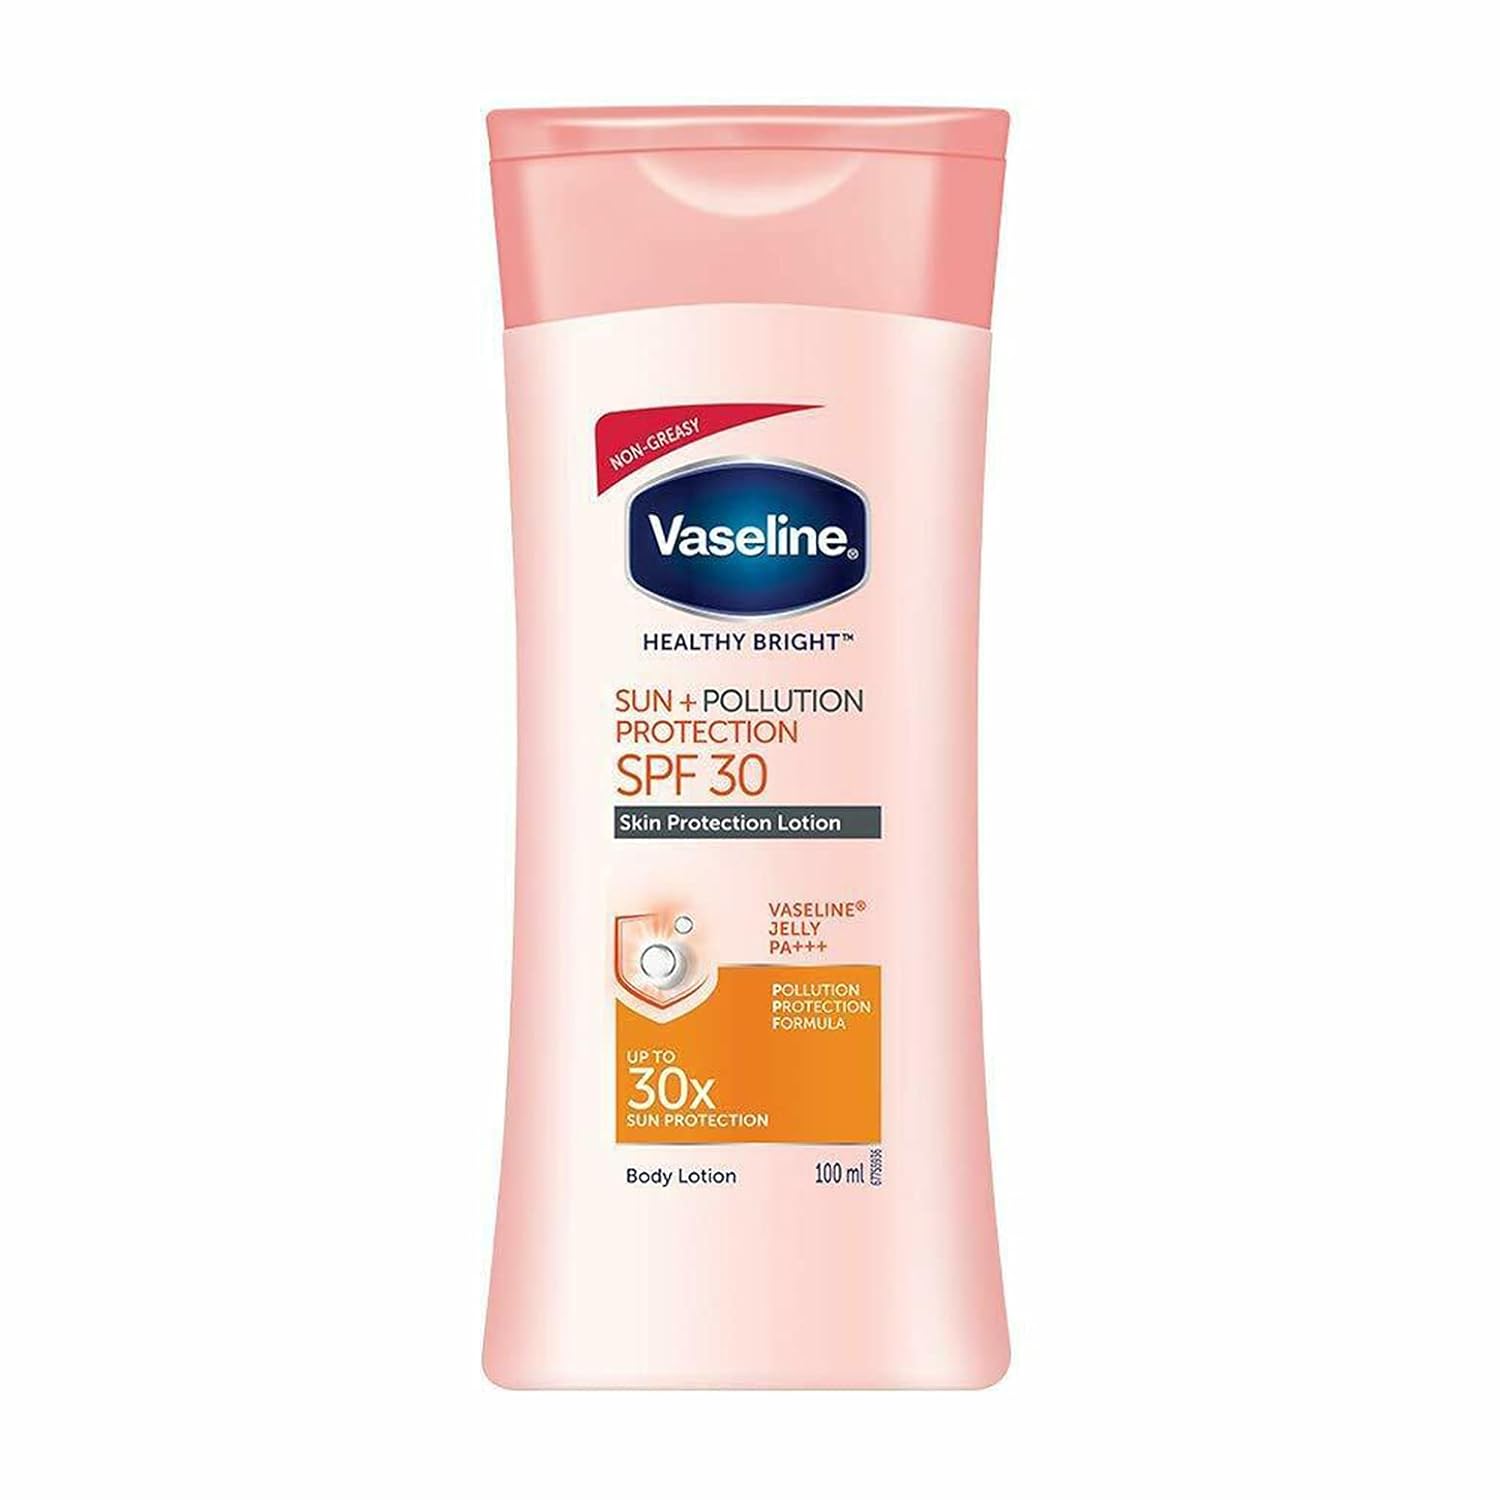 Vaseline Healthy Bright Sun Protection Body Lotion